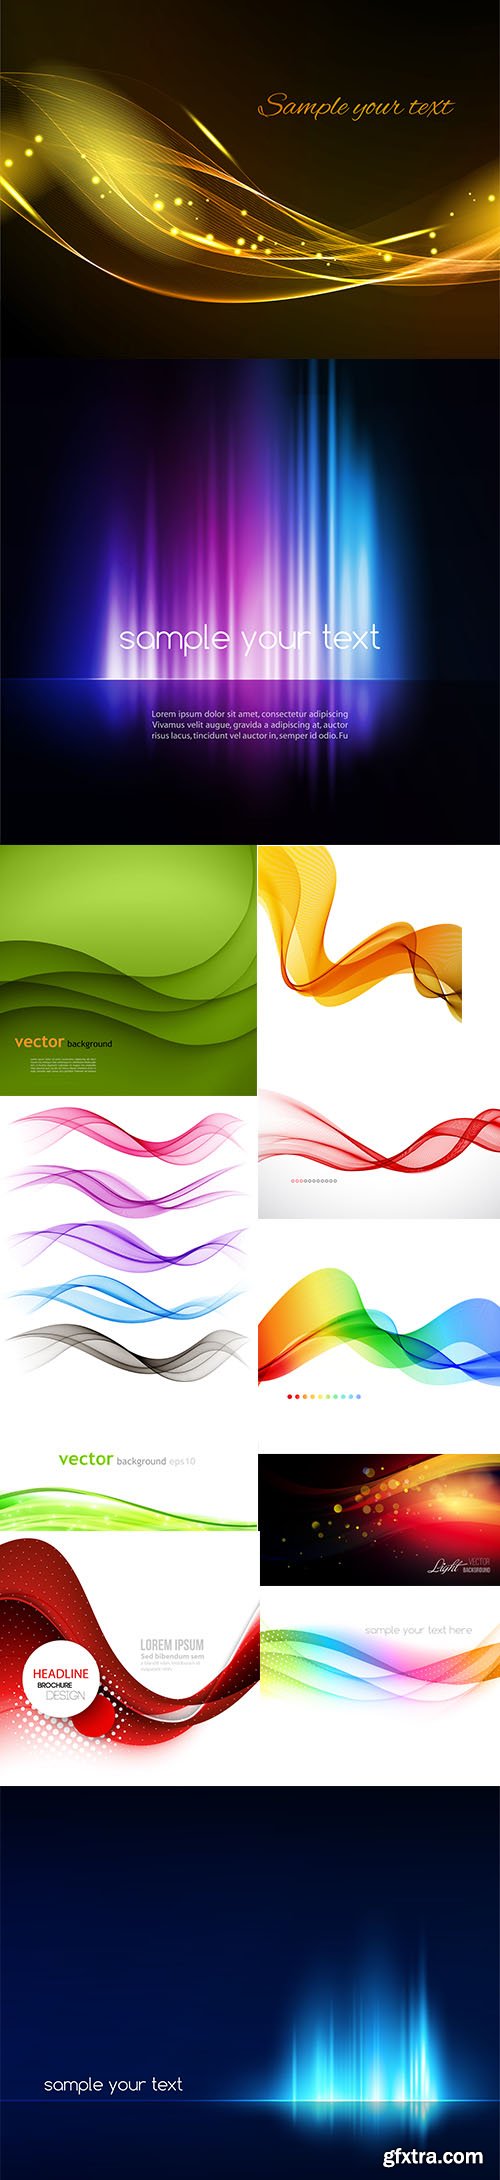 Abstract wave and shiny background